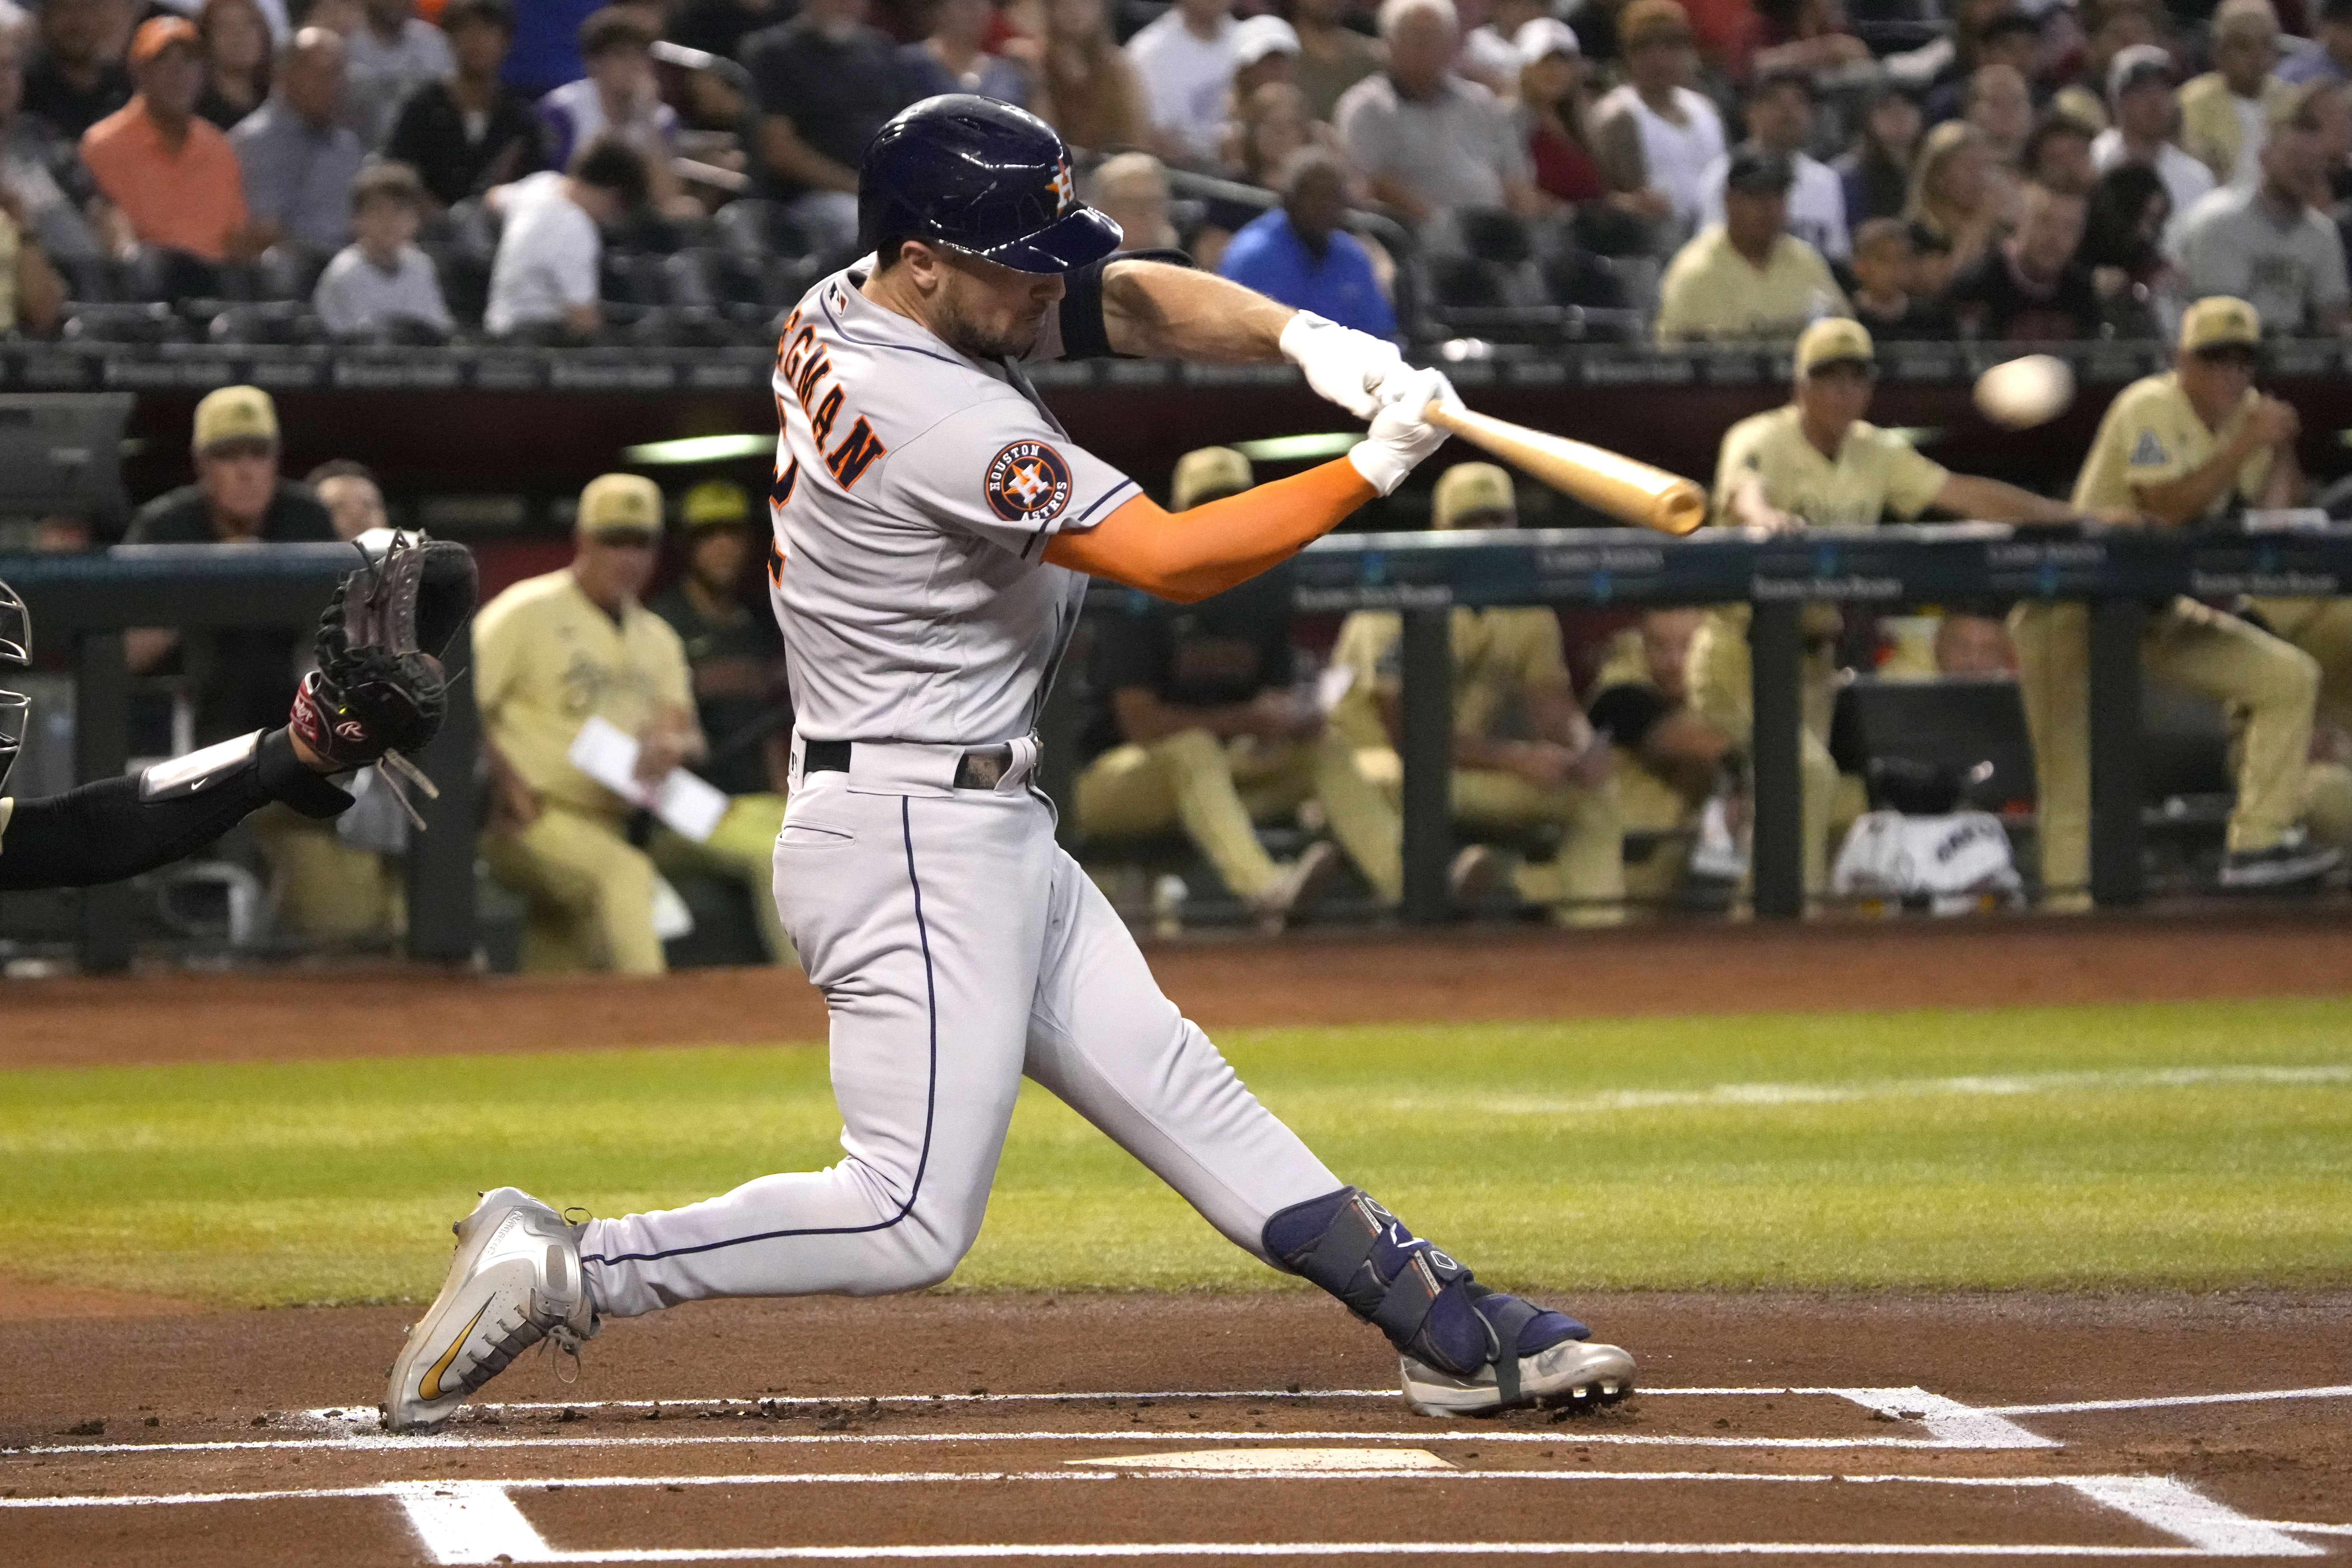 Astros keep pace with tight win over D-backs